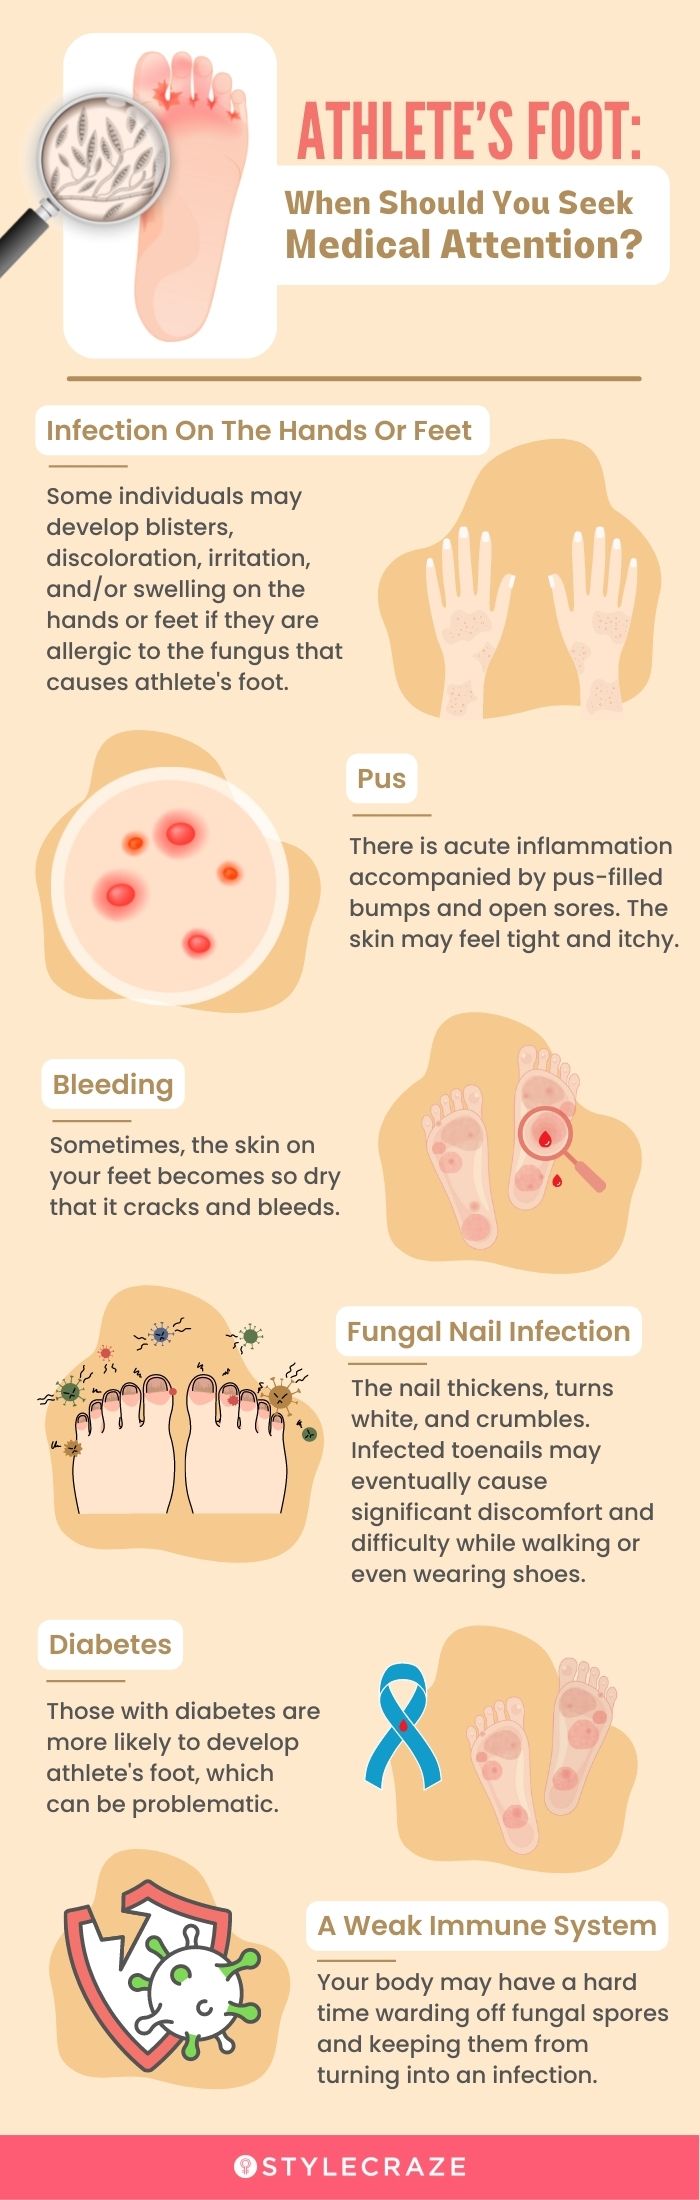 athlete’s foot when should you seek medical attention [infographic]